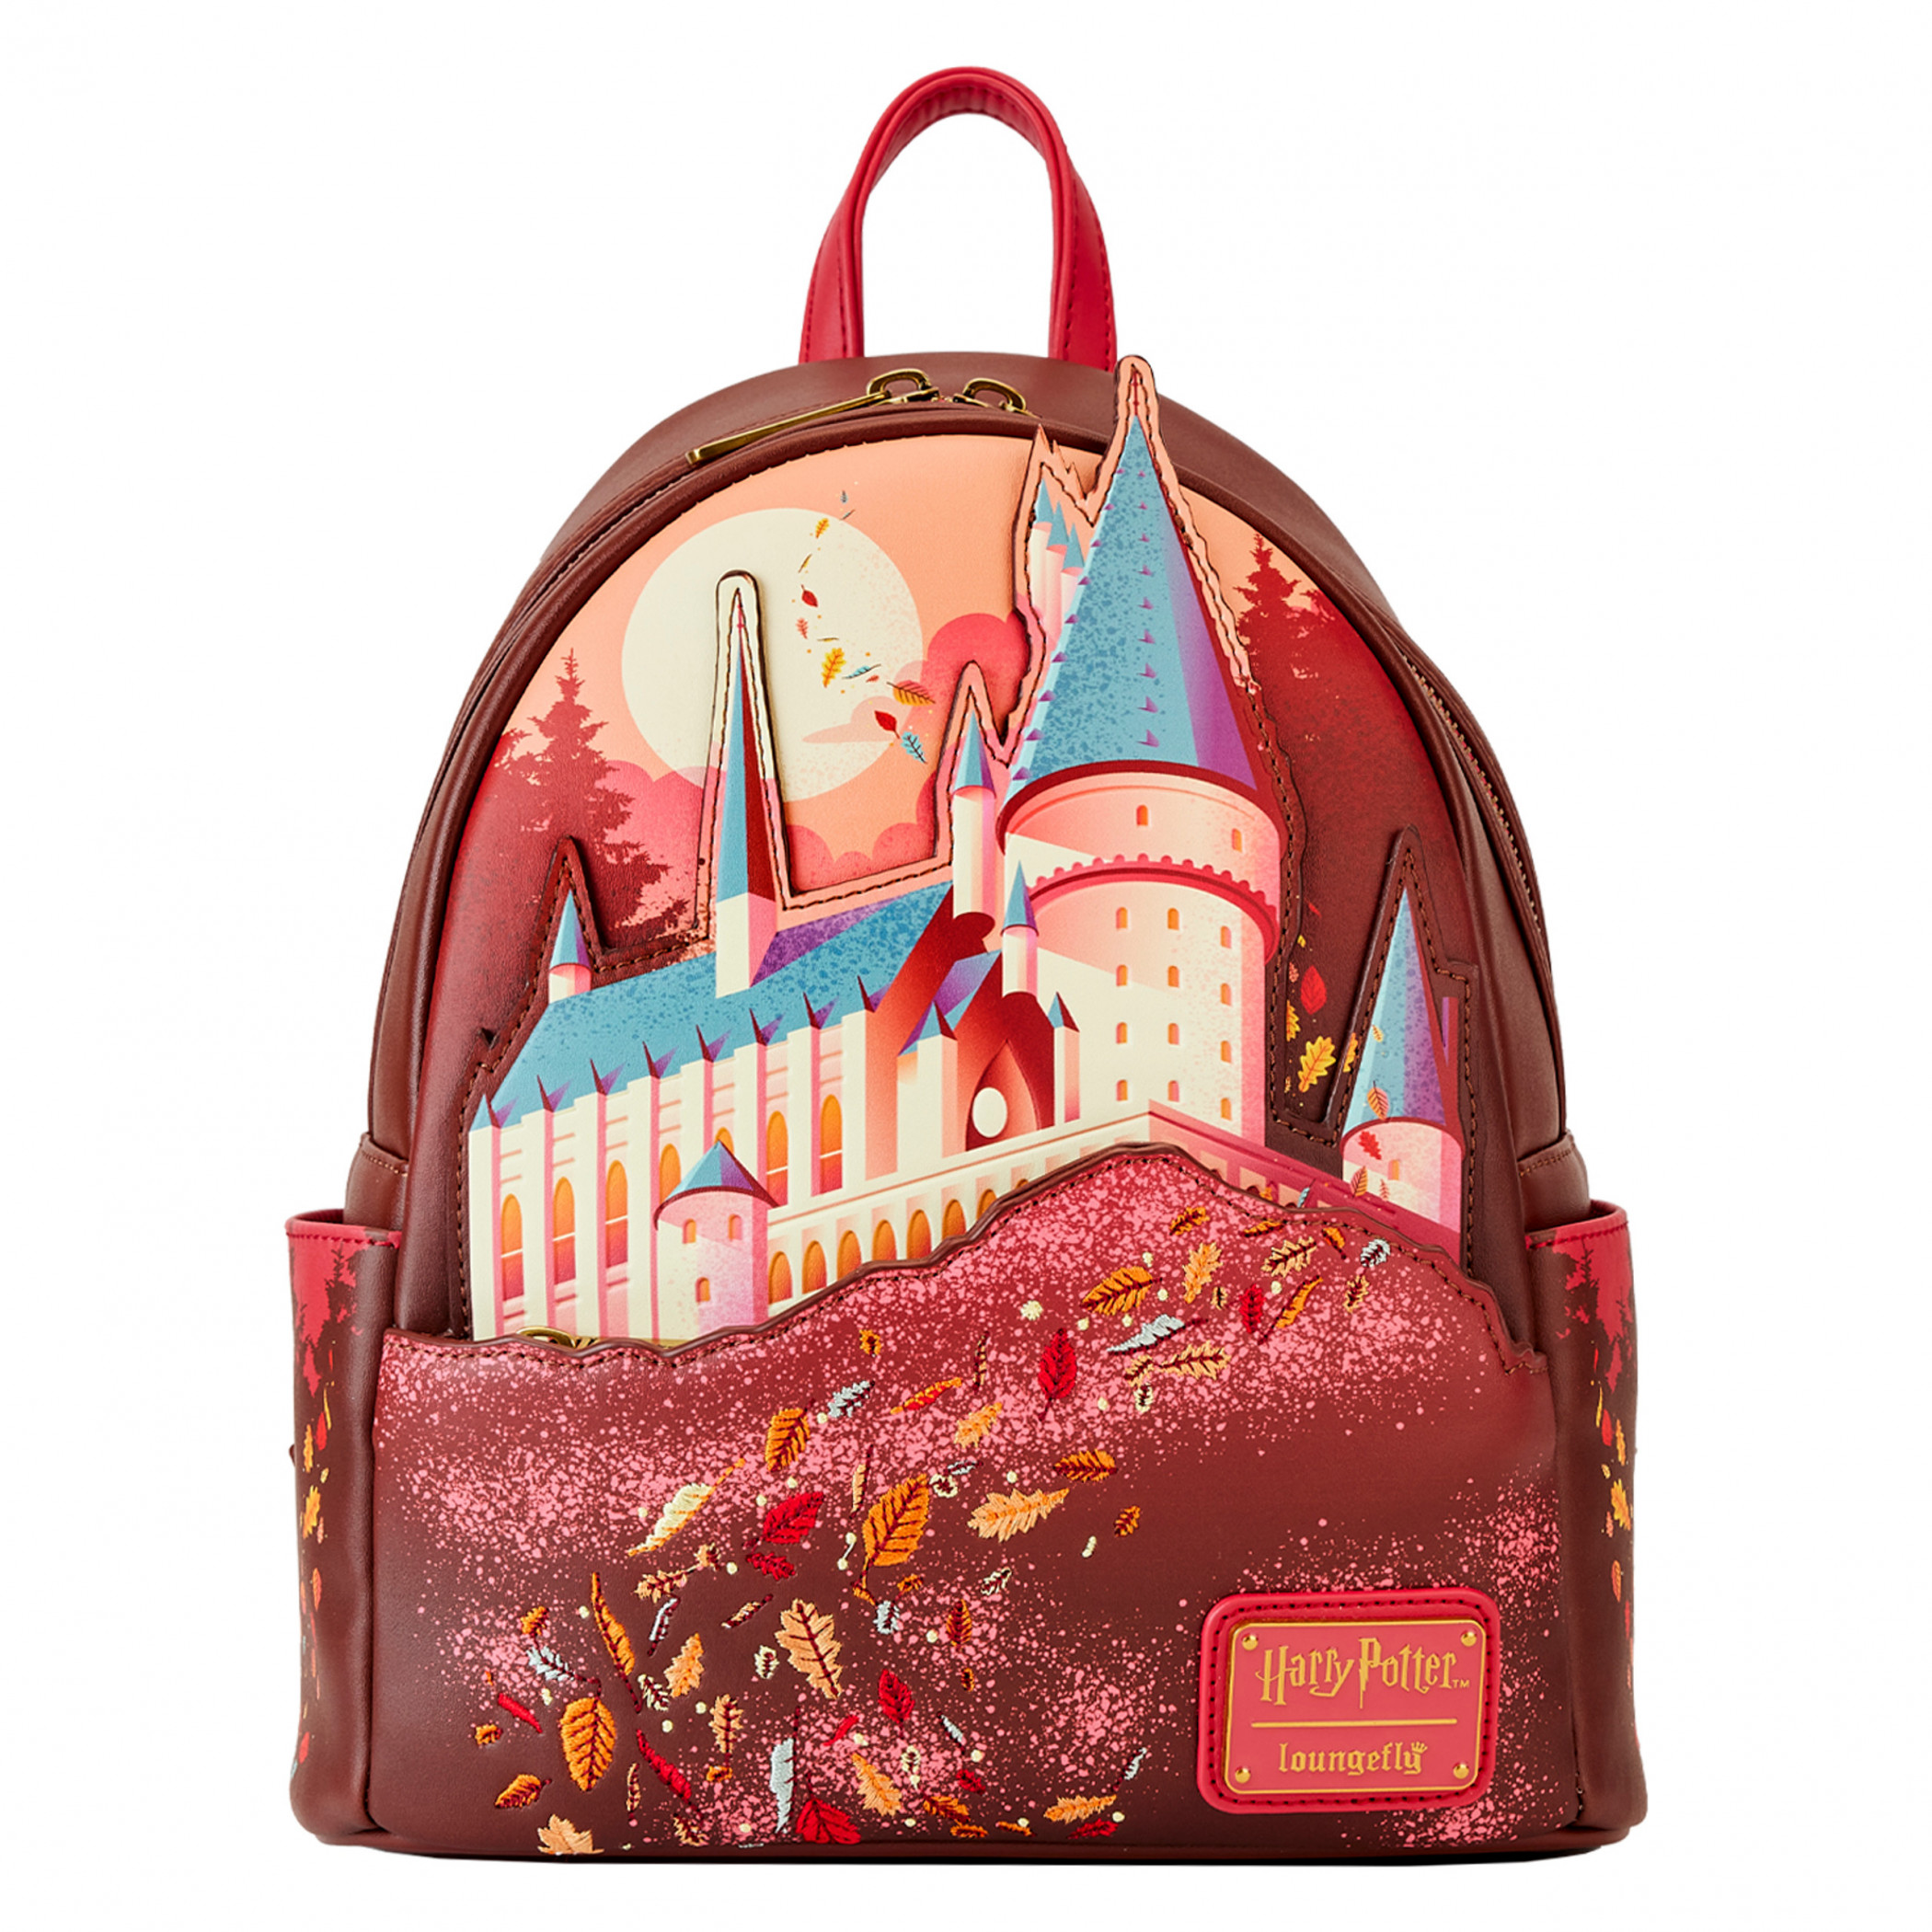 Harry Potter Hogwarts in Fall Mini Backpack by Loungefly